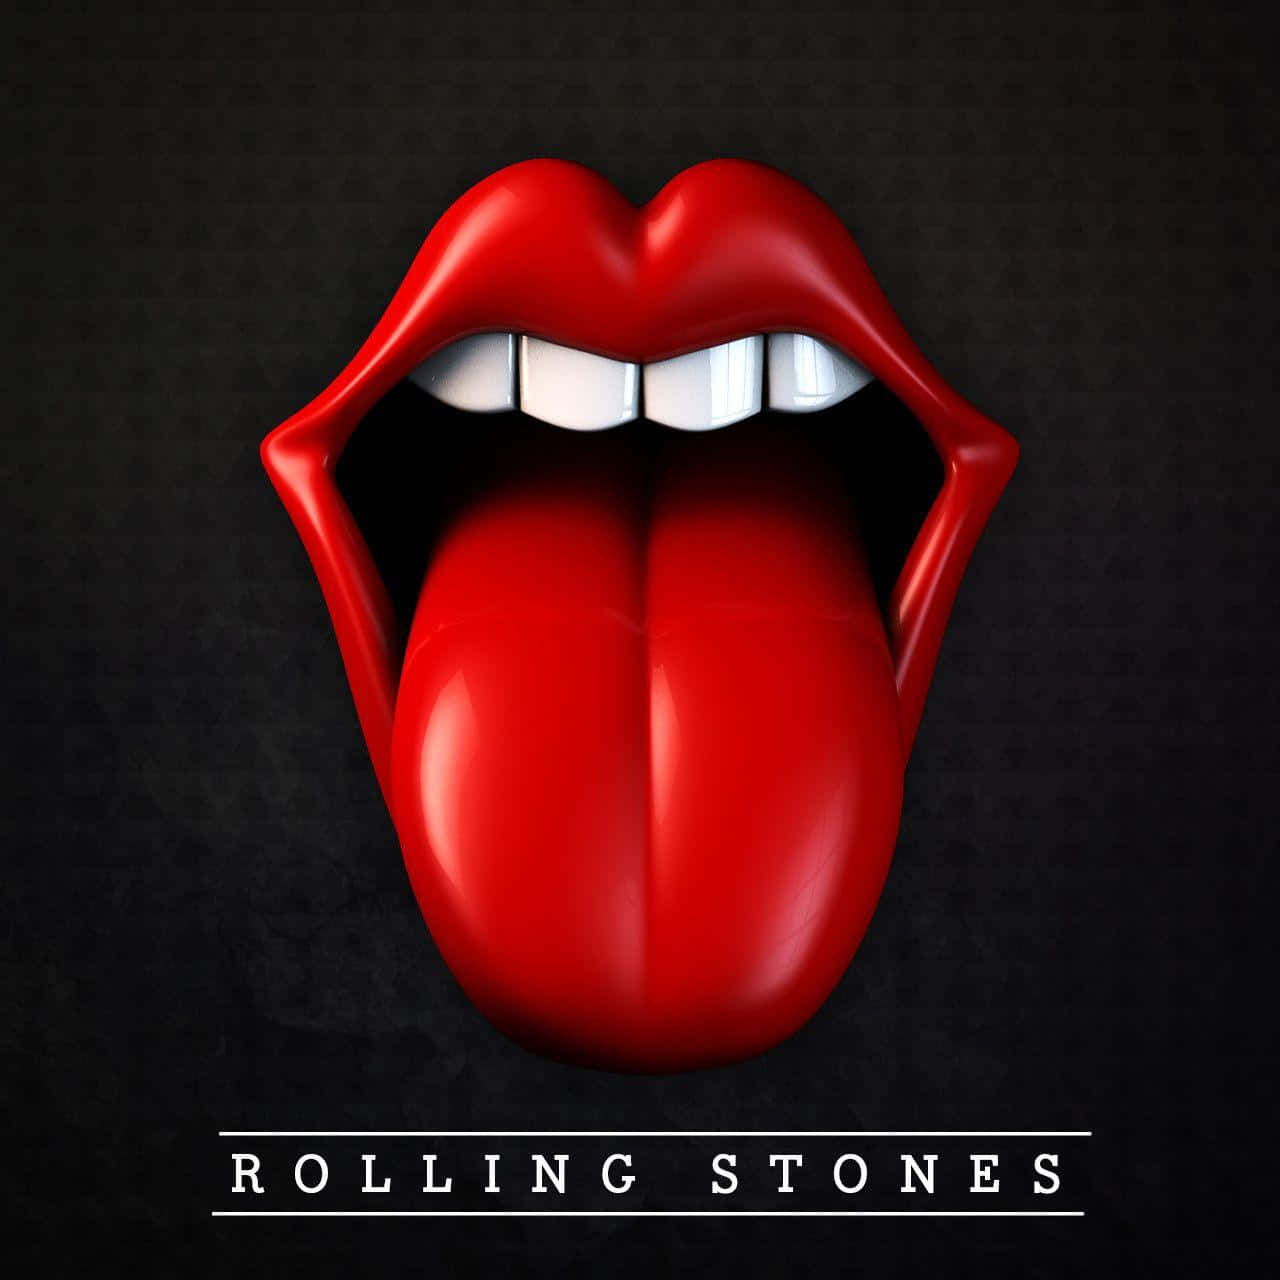 Download Rolling Stones Logo Tongue Out Wallpaper